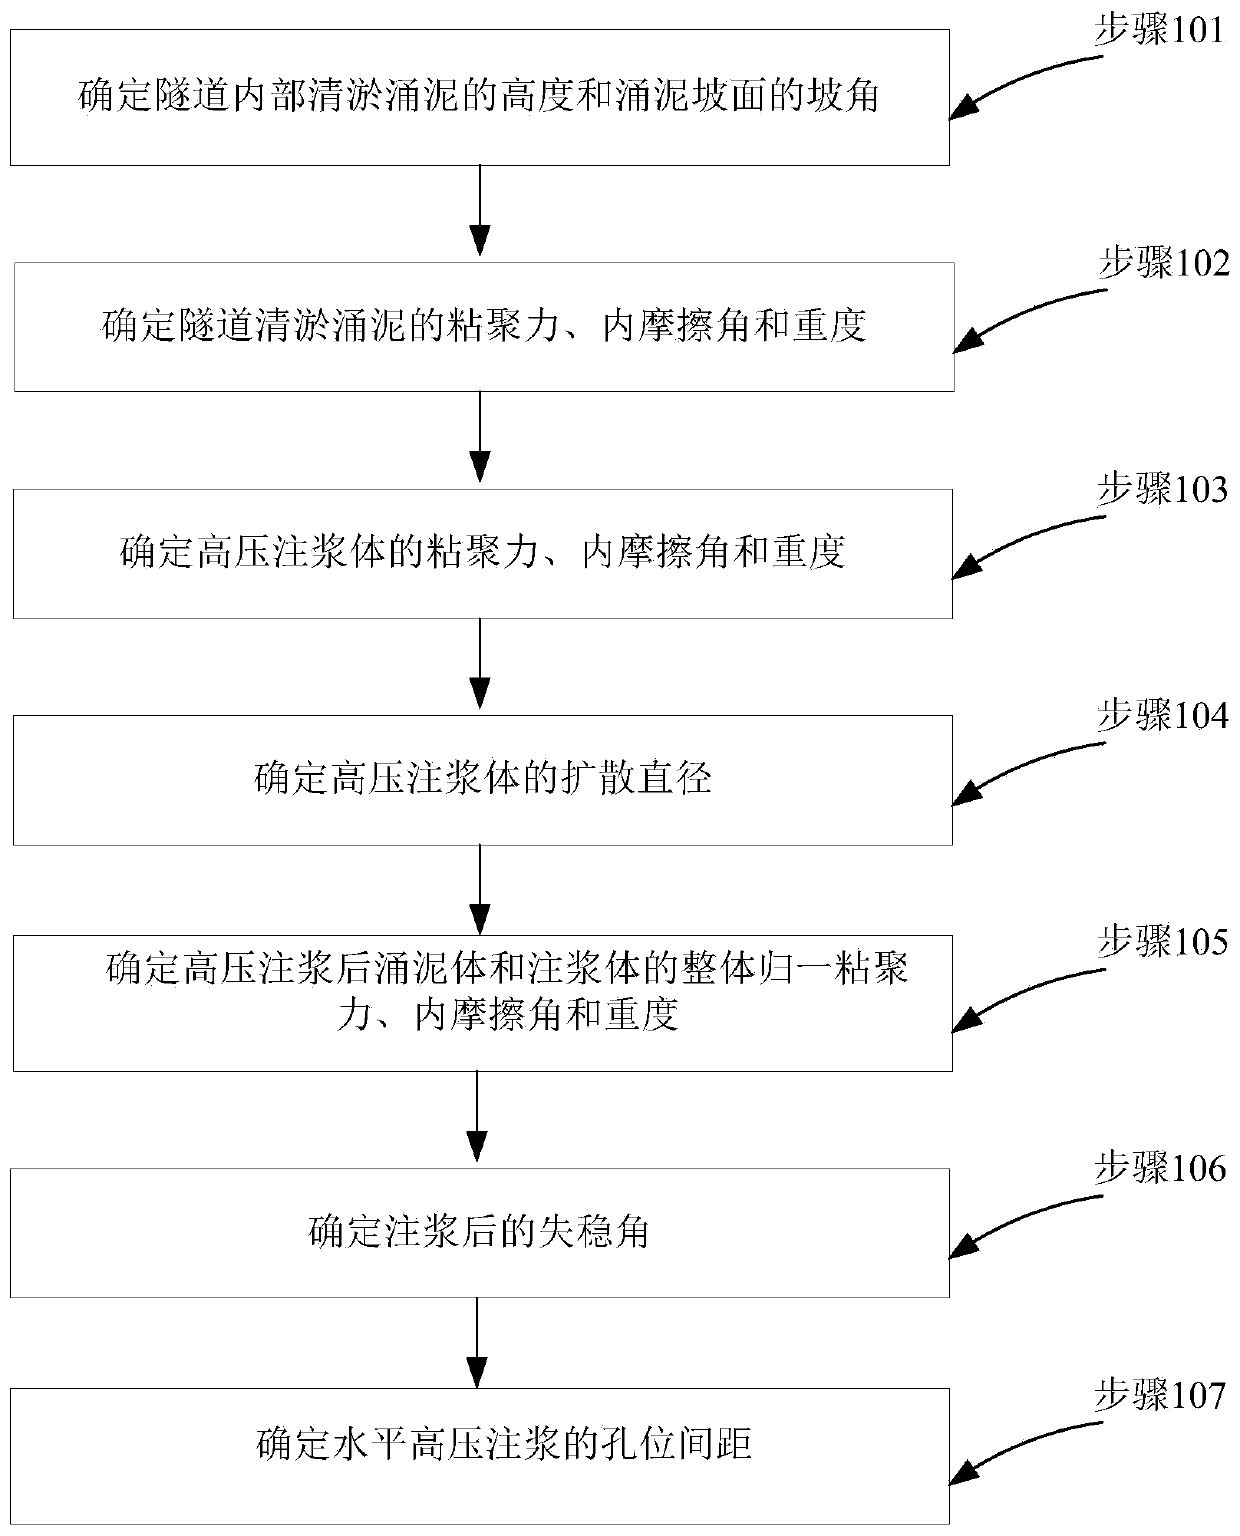 Hole position space prediction method for tunnel gushing mud desilting horizontal high-pressure grouting